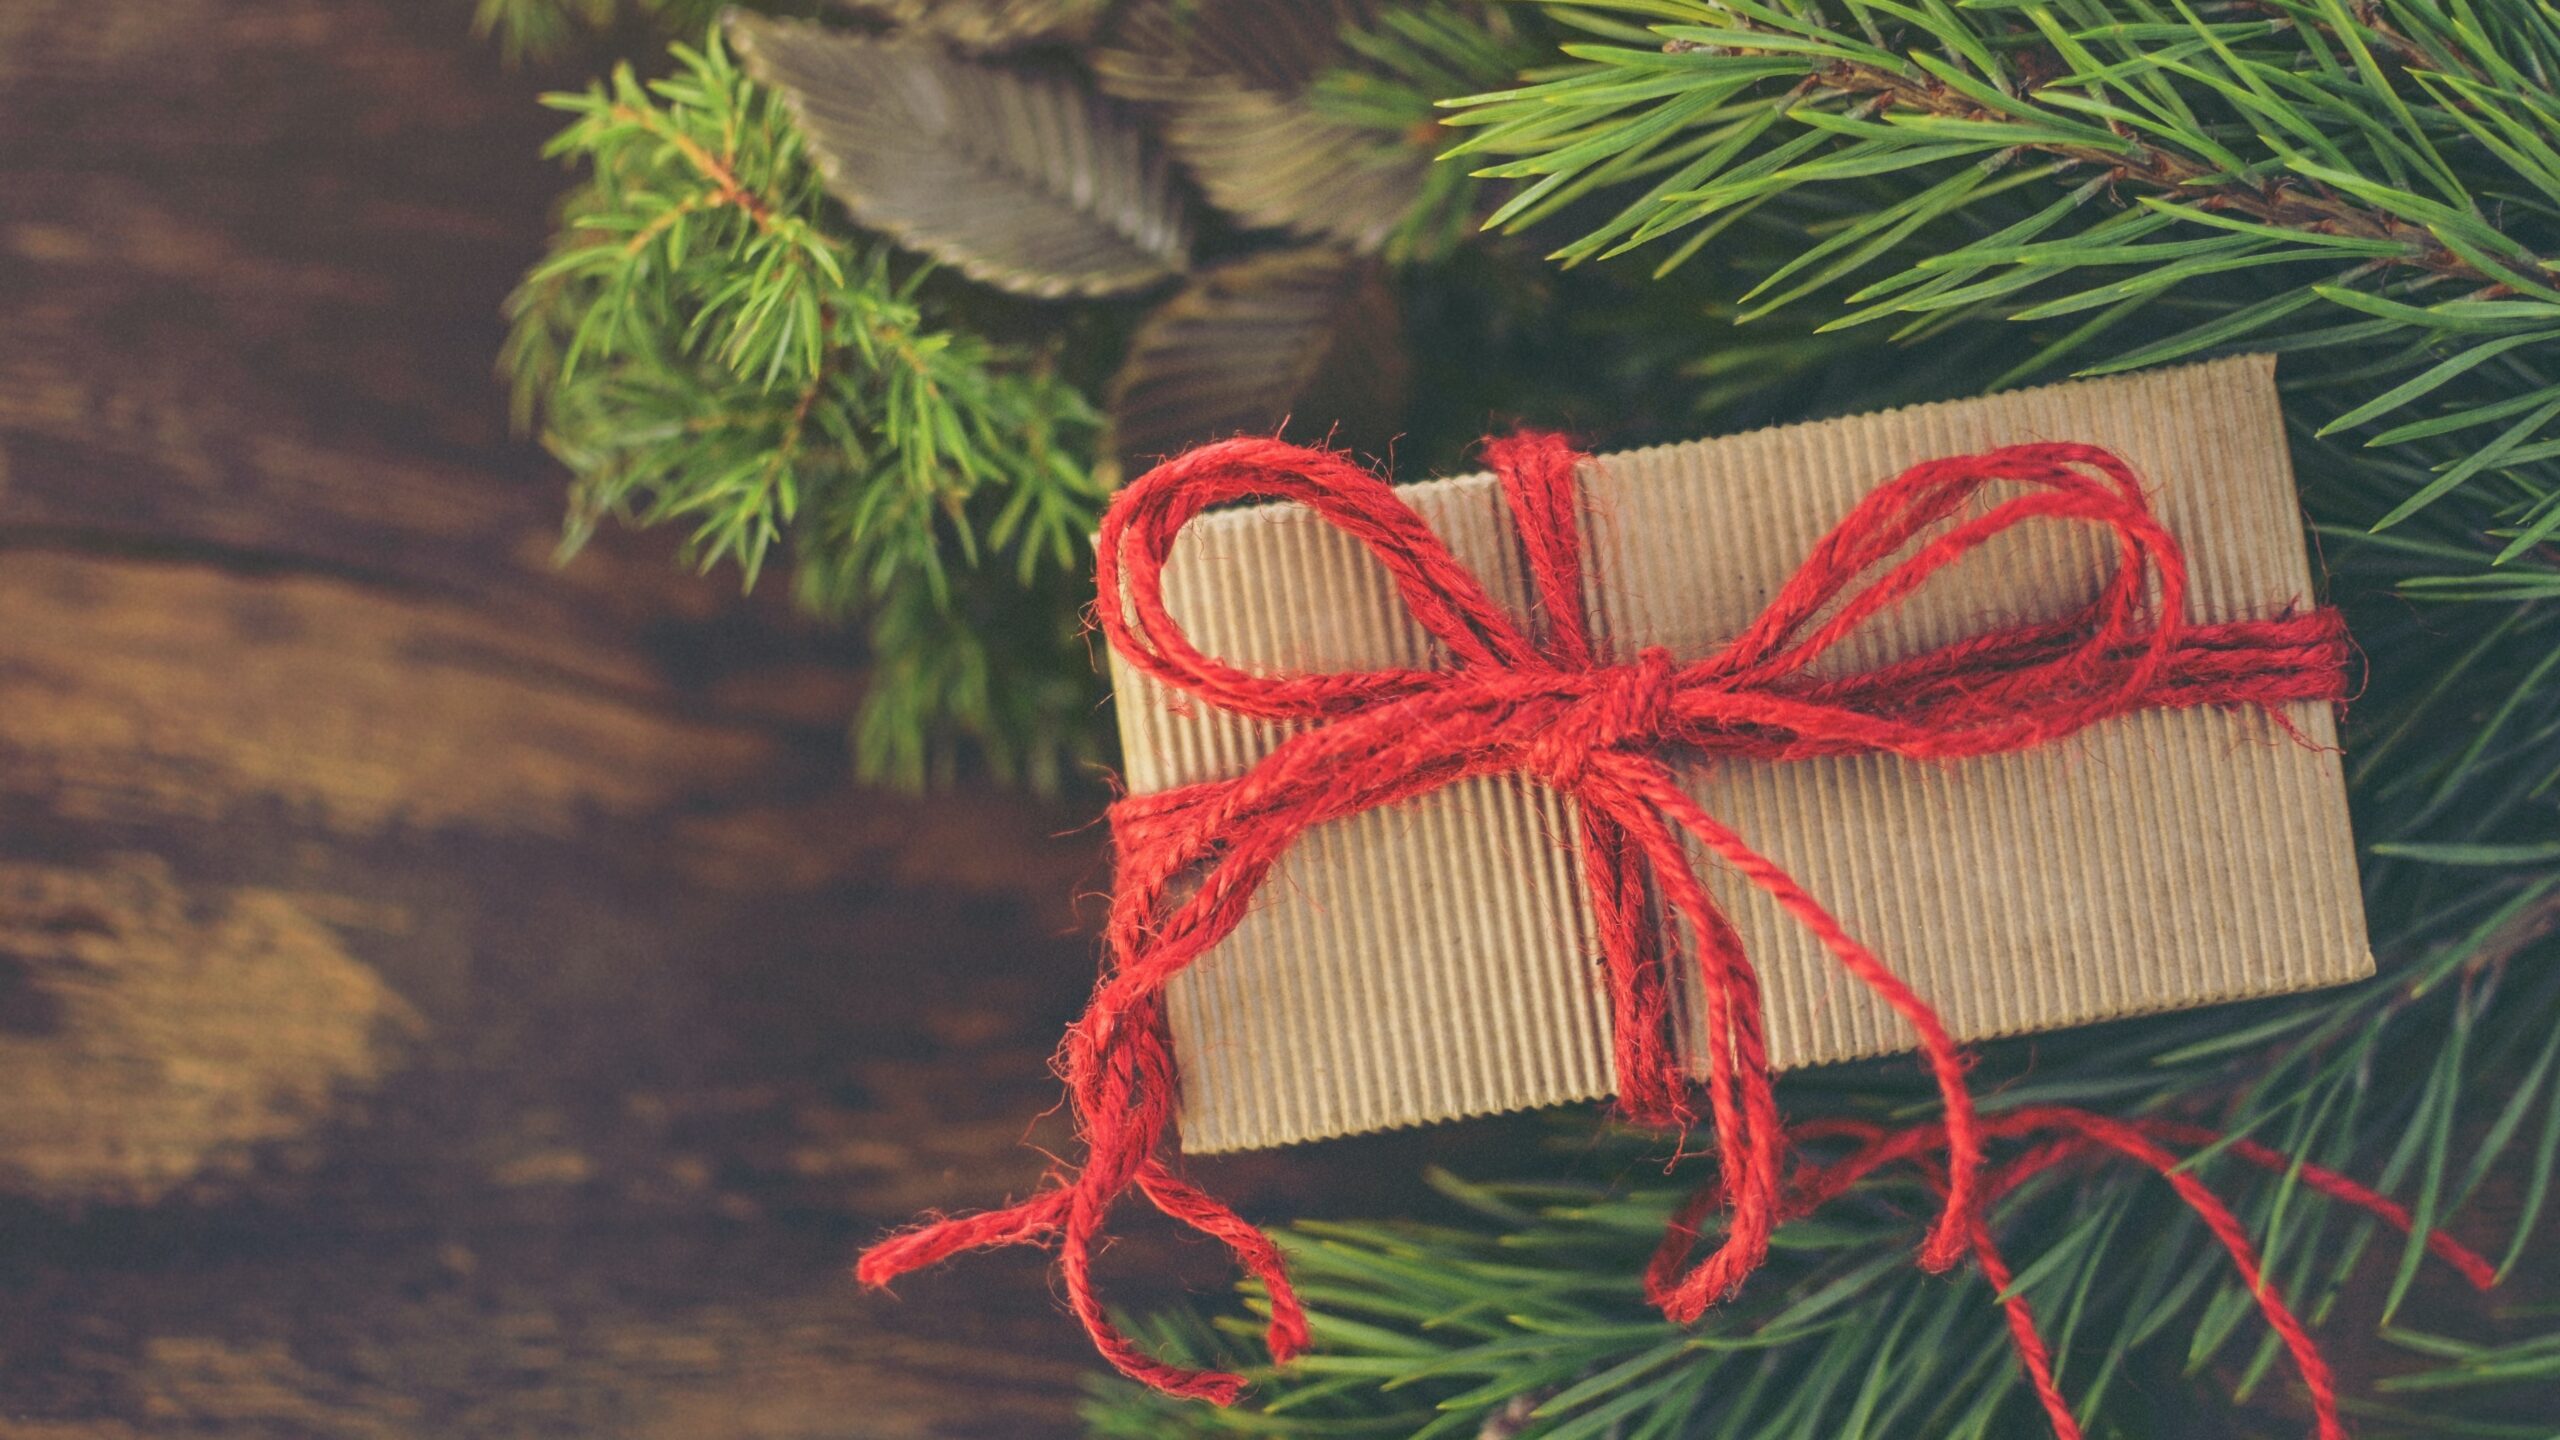 image of a small gift wrapped in blue ribbon and brown paper sitting on a sprig of pines